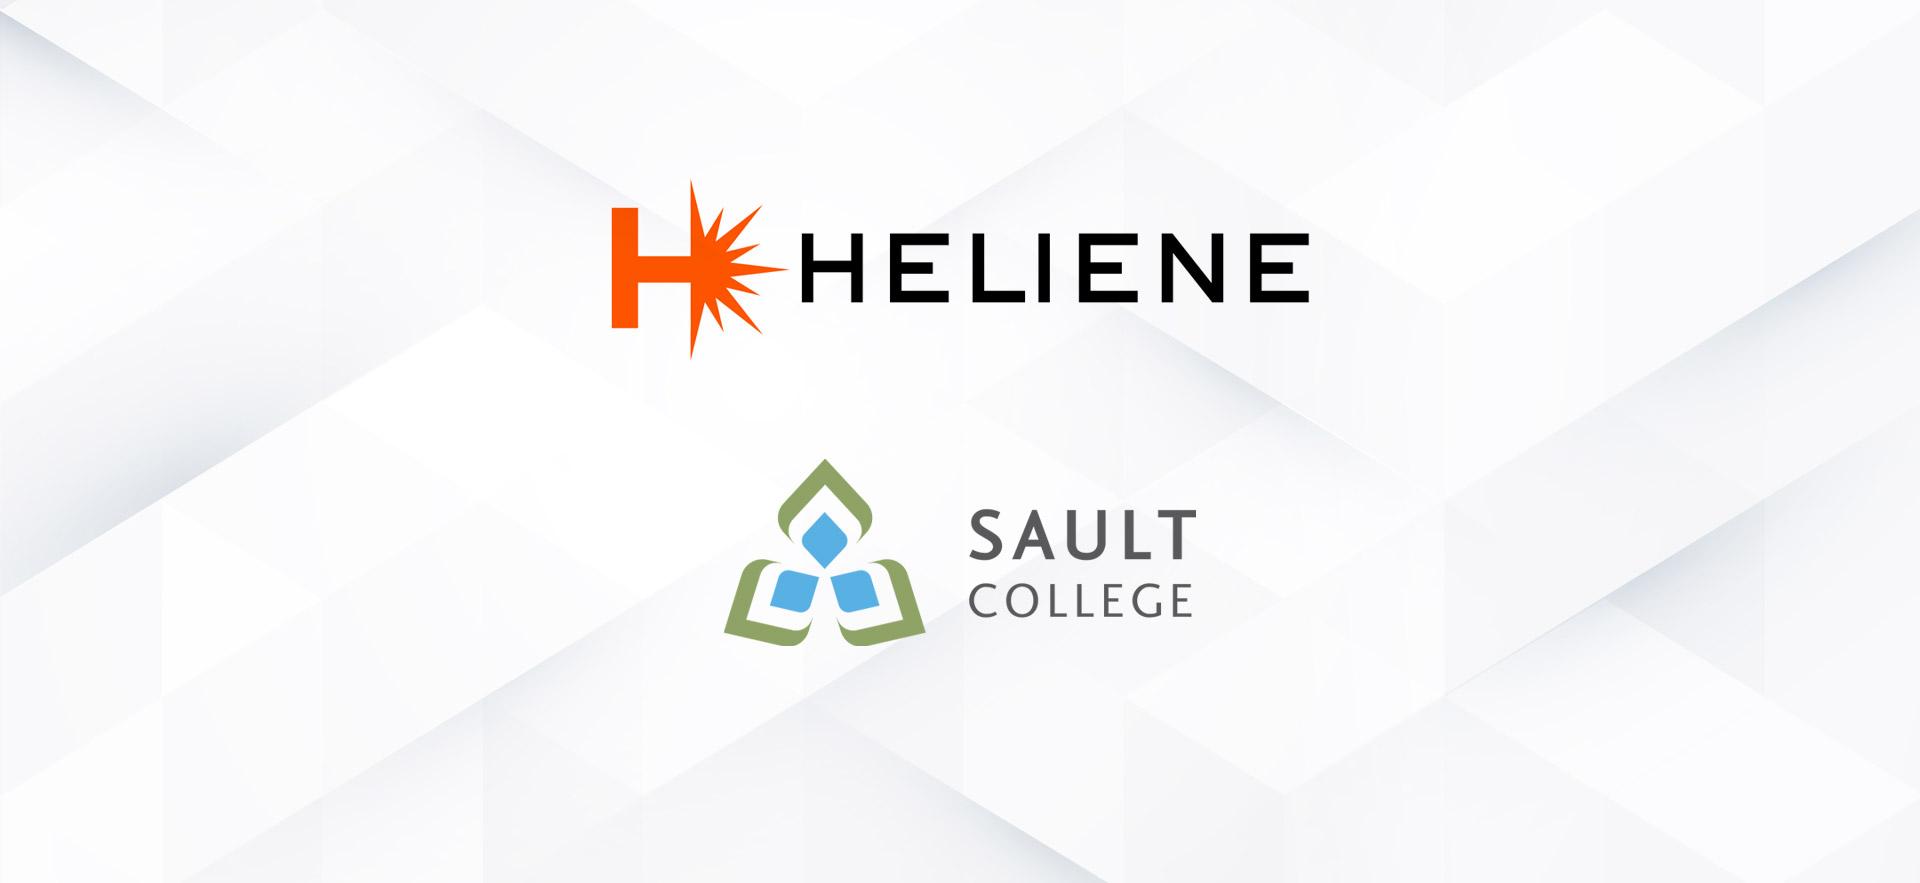 Heliene and Sault College logos